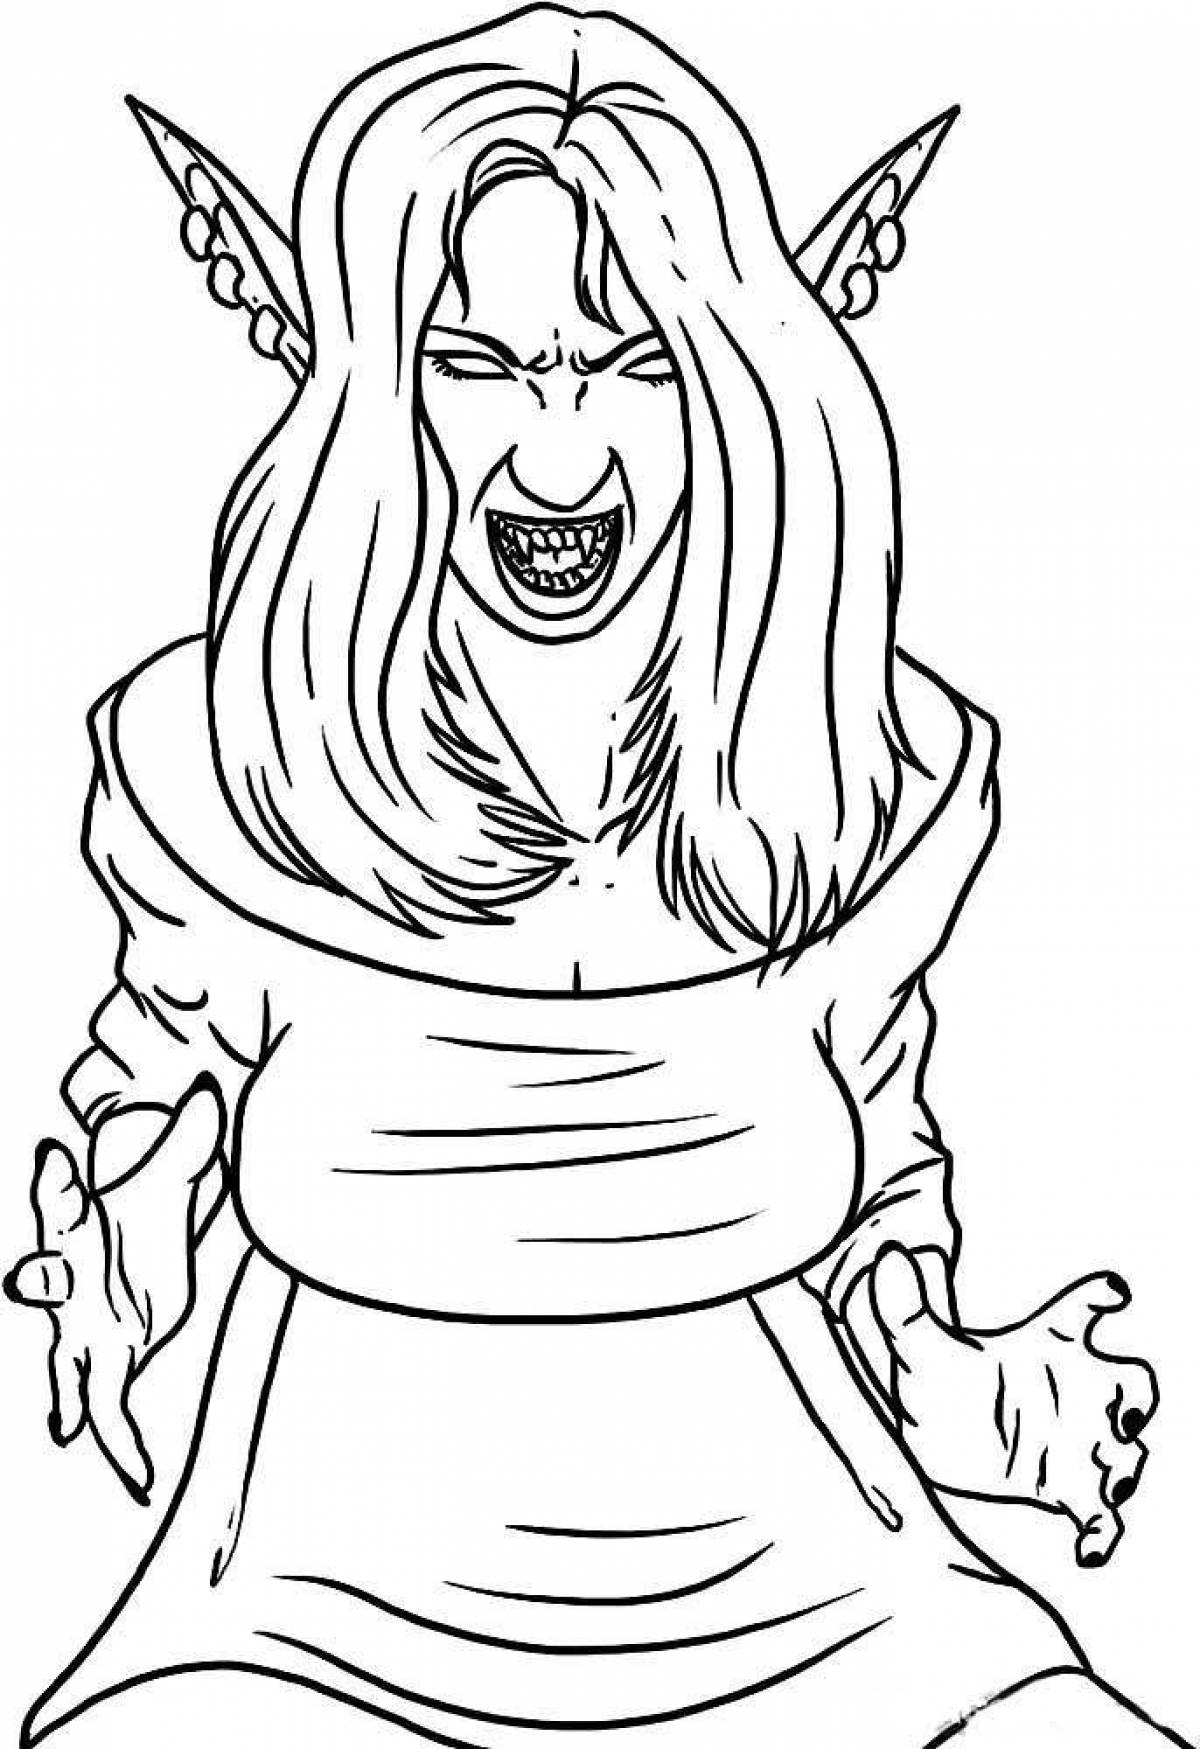 Coloring page terrible vampire